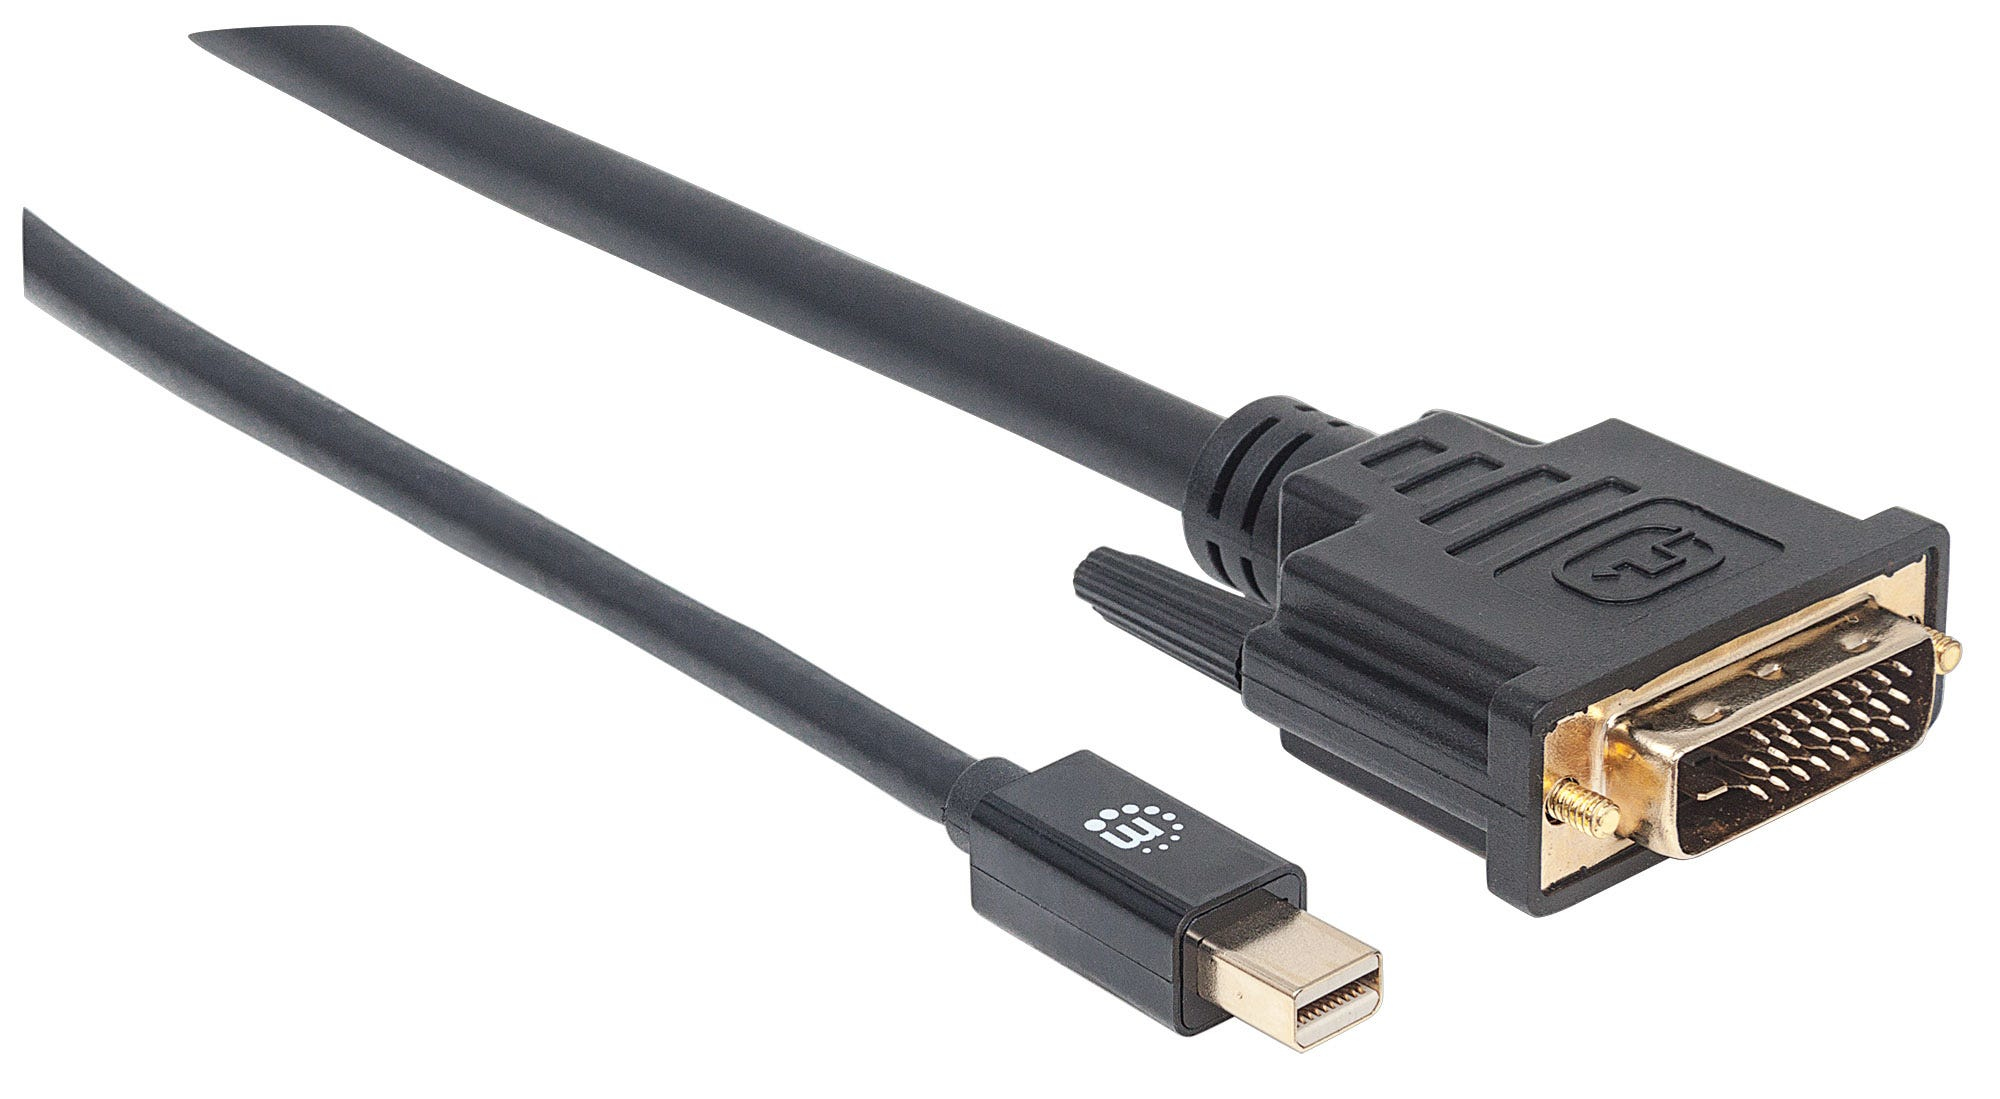 Manhattan Mini DisplayPort 1.2a to DVI 24+1 Cable, 1080p, 1.8m, Male to Male, Passive, 1080p@60Hz, Compatible with DVD-D, Black, Lifetime Warranty, Polybag